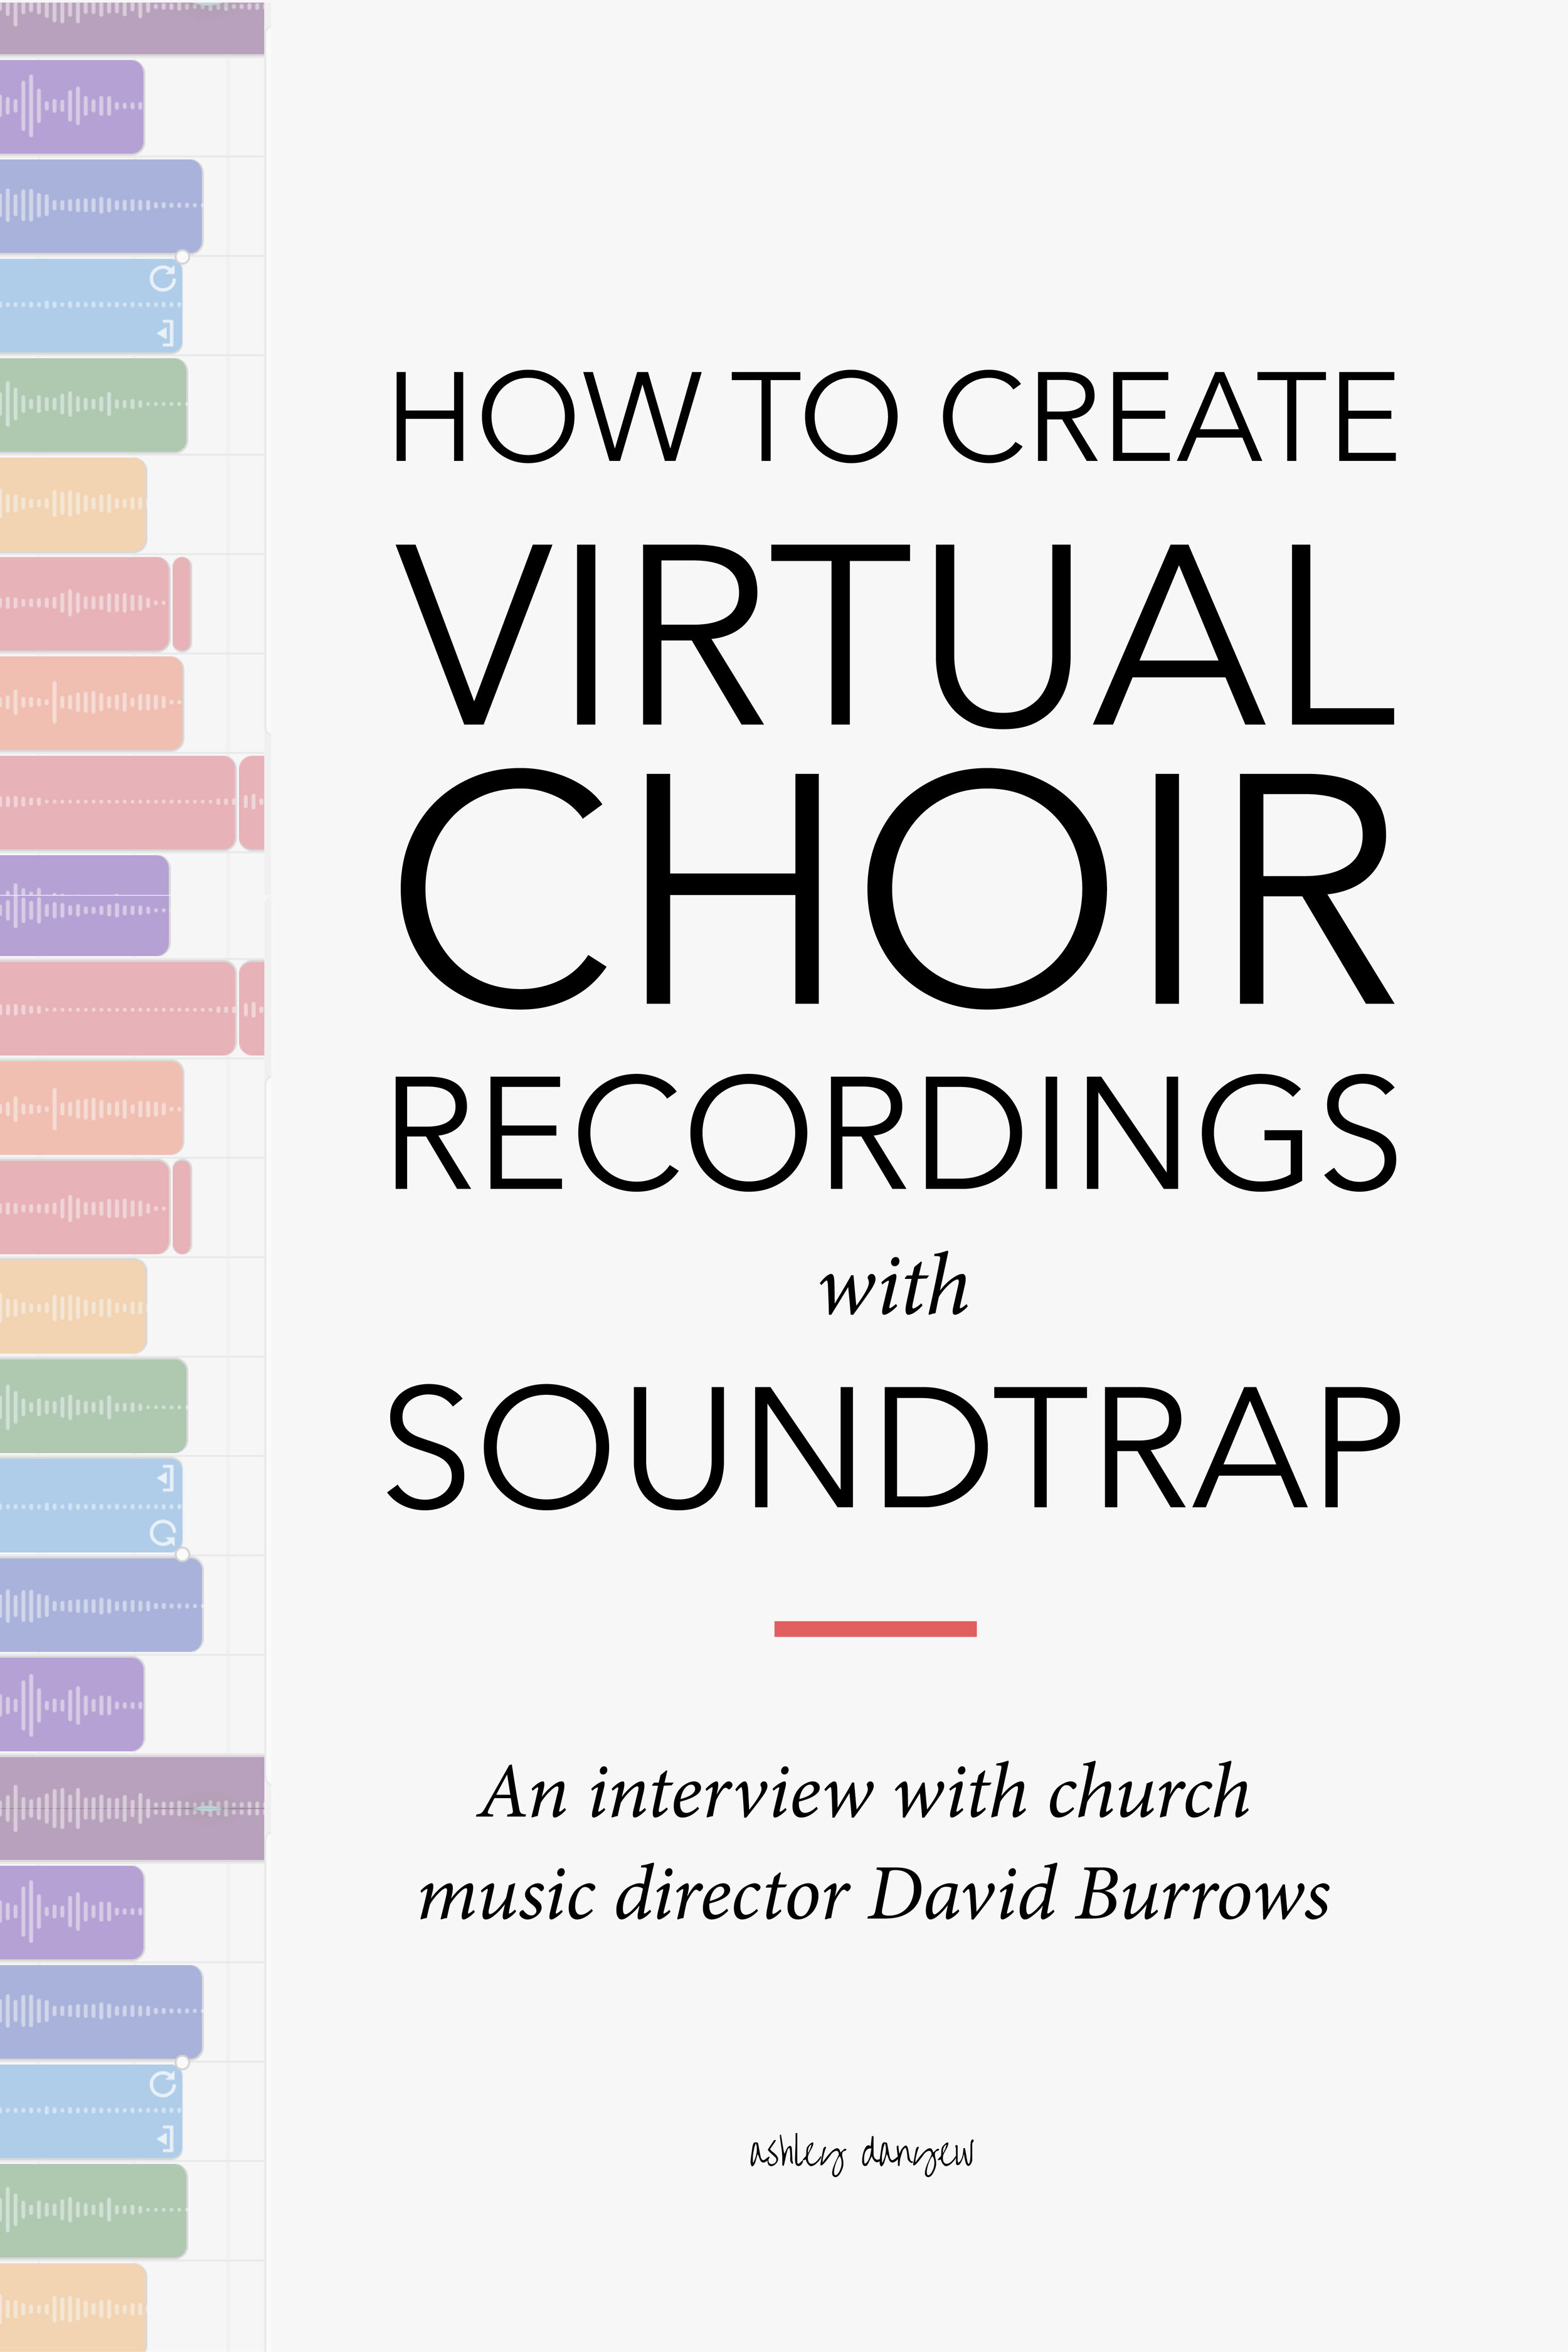 How to Create Virtual Choir Recordings with Soundtrap